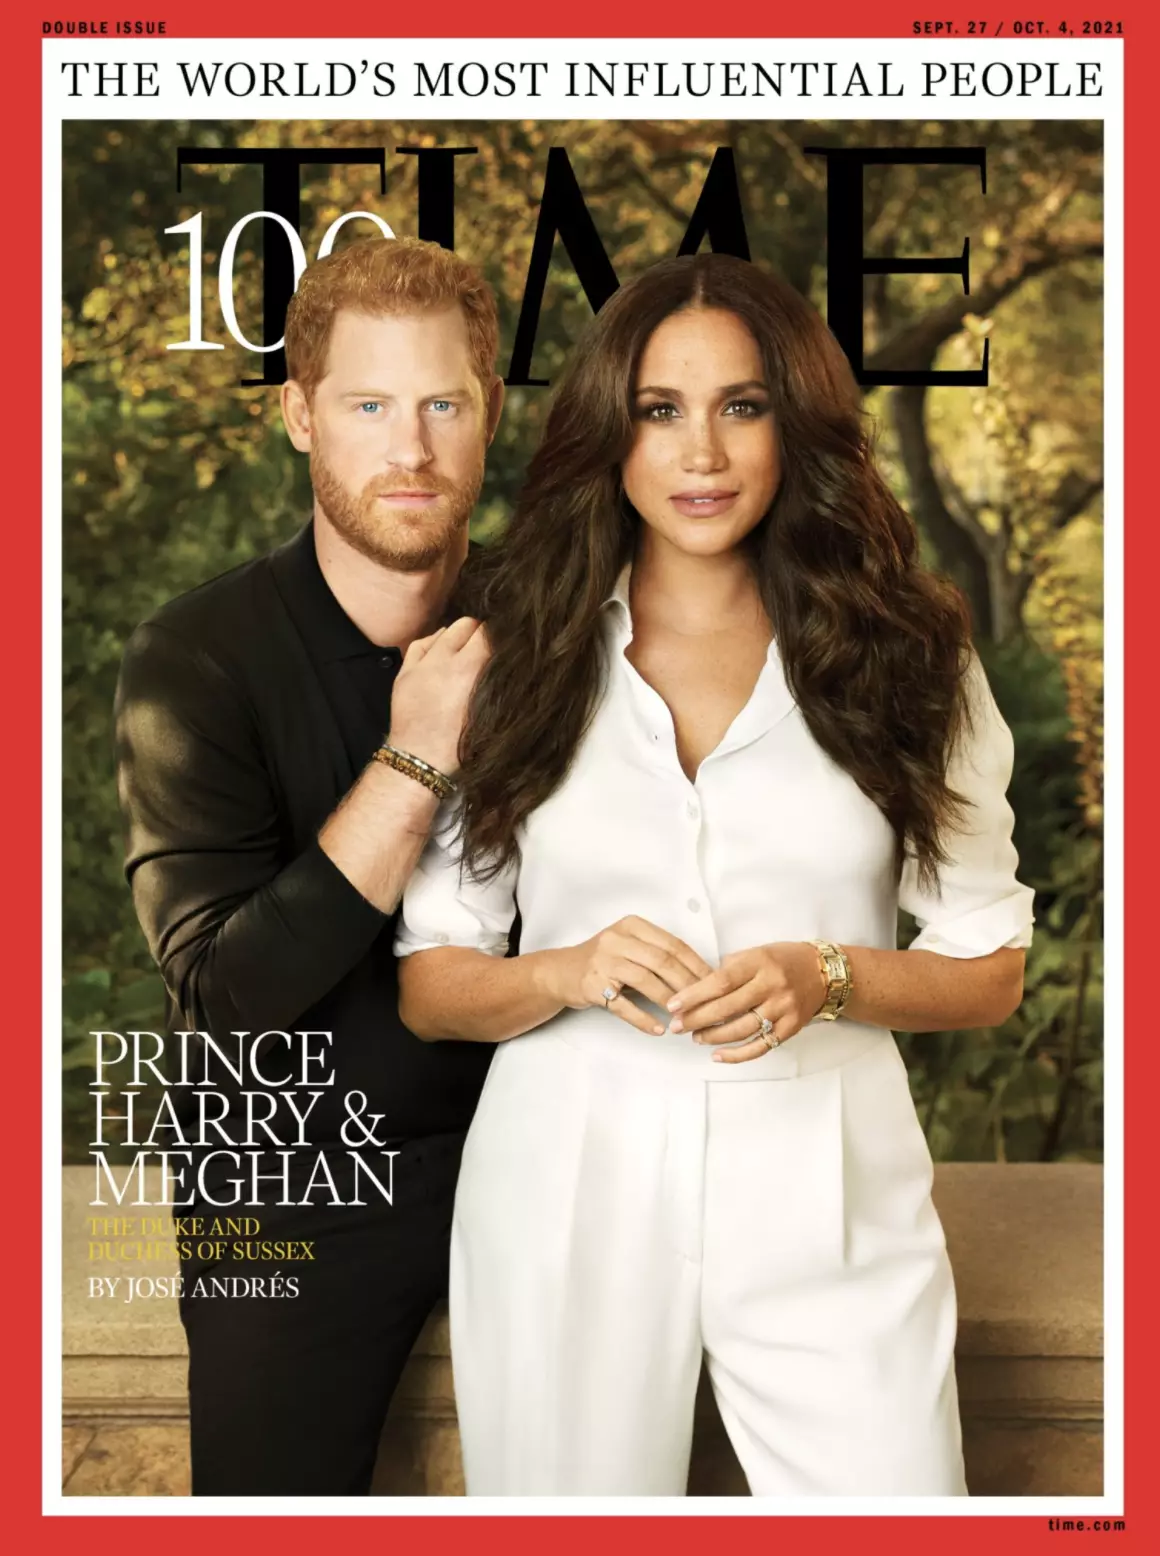 Prince Harry and Meghan Markle posing for TIME magazine.